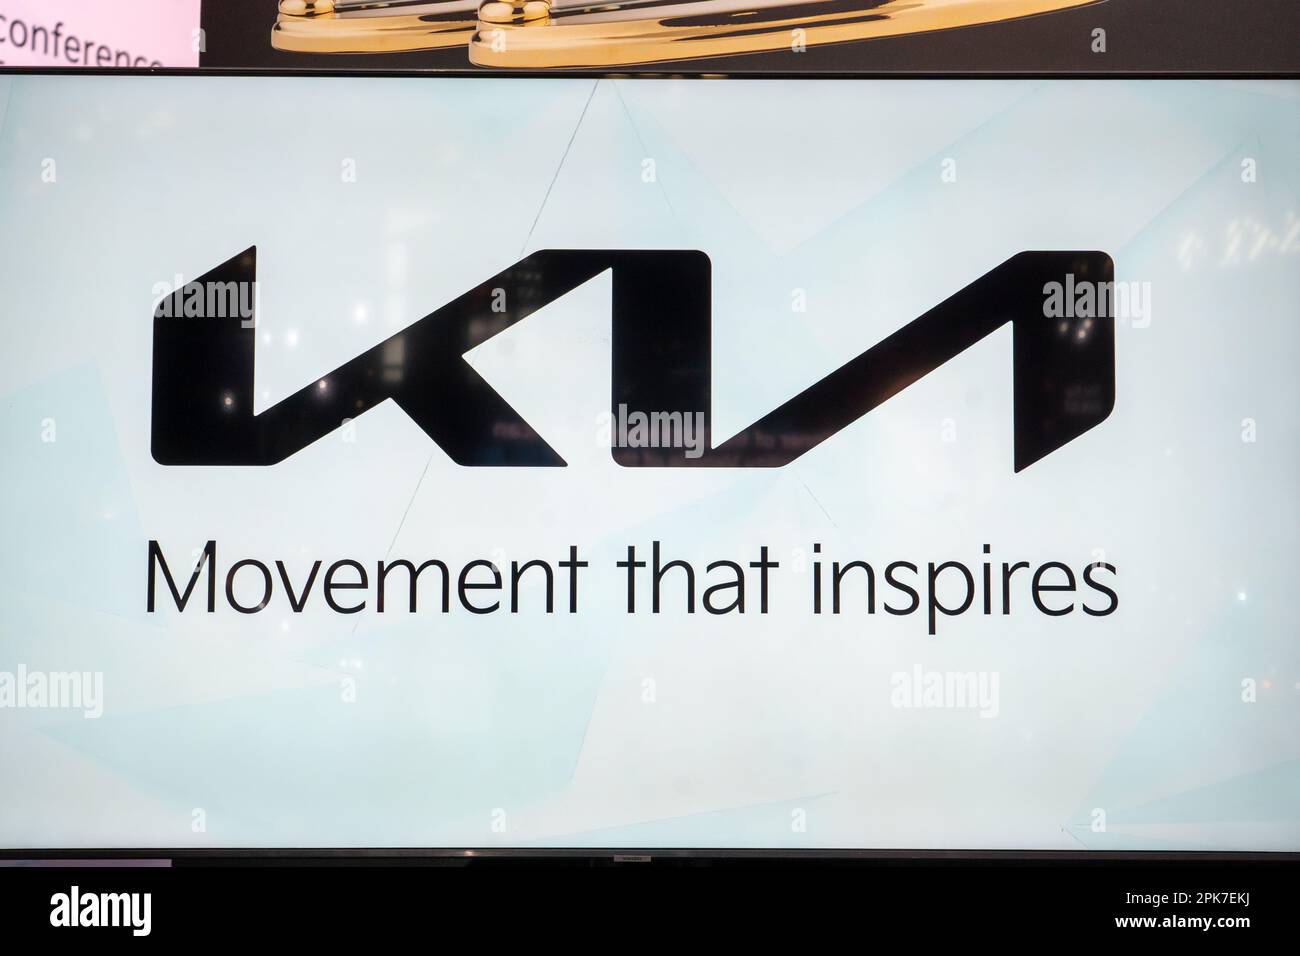 NEW YORK, NEW YORK - APRIL 05: Kia Logo seen on sign at the International Auto Show press preview at the Jacob Javits Convention Center on April 5, 2023 in New York City. Stock Photo